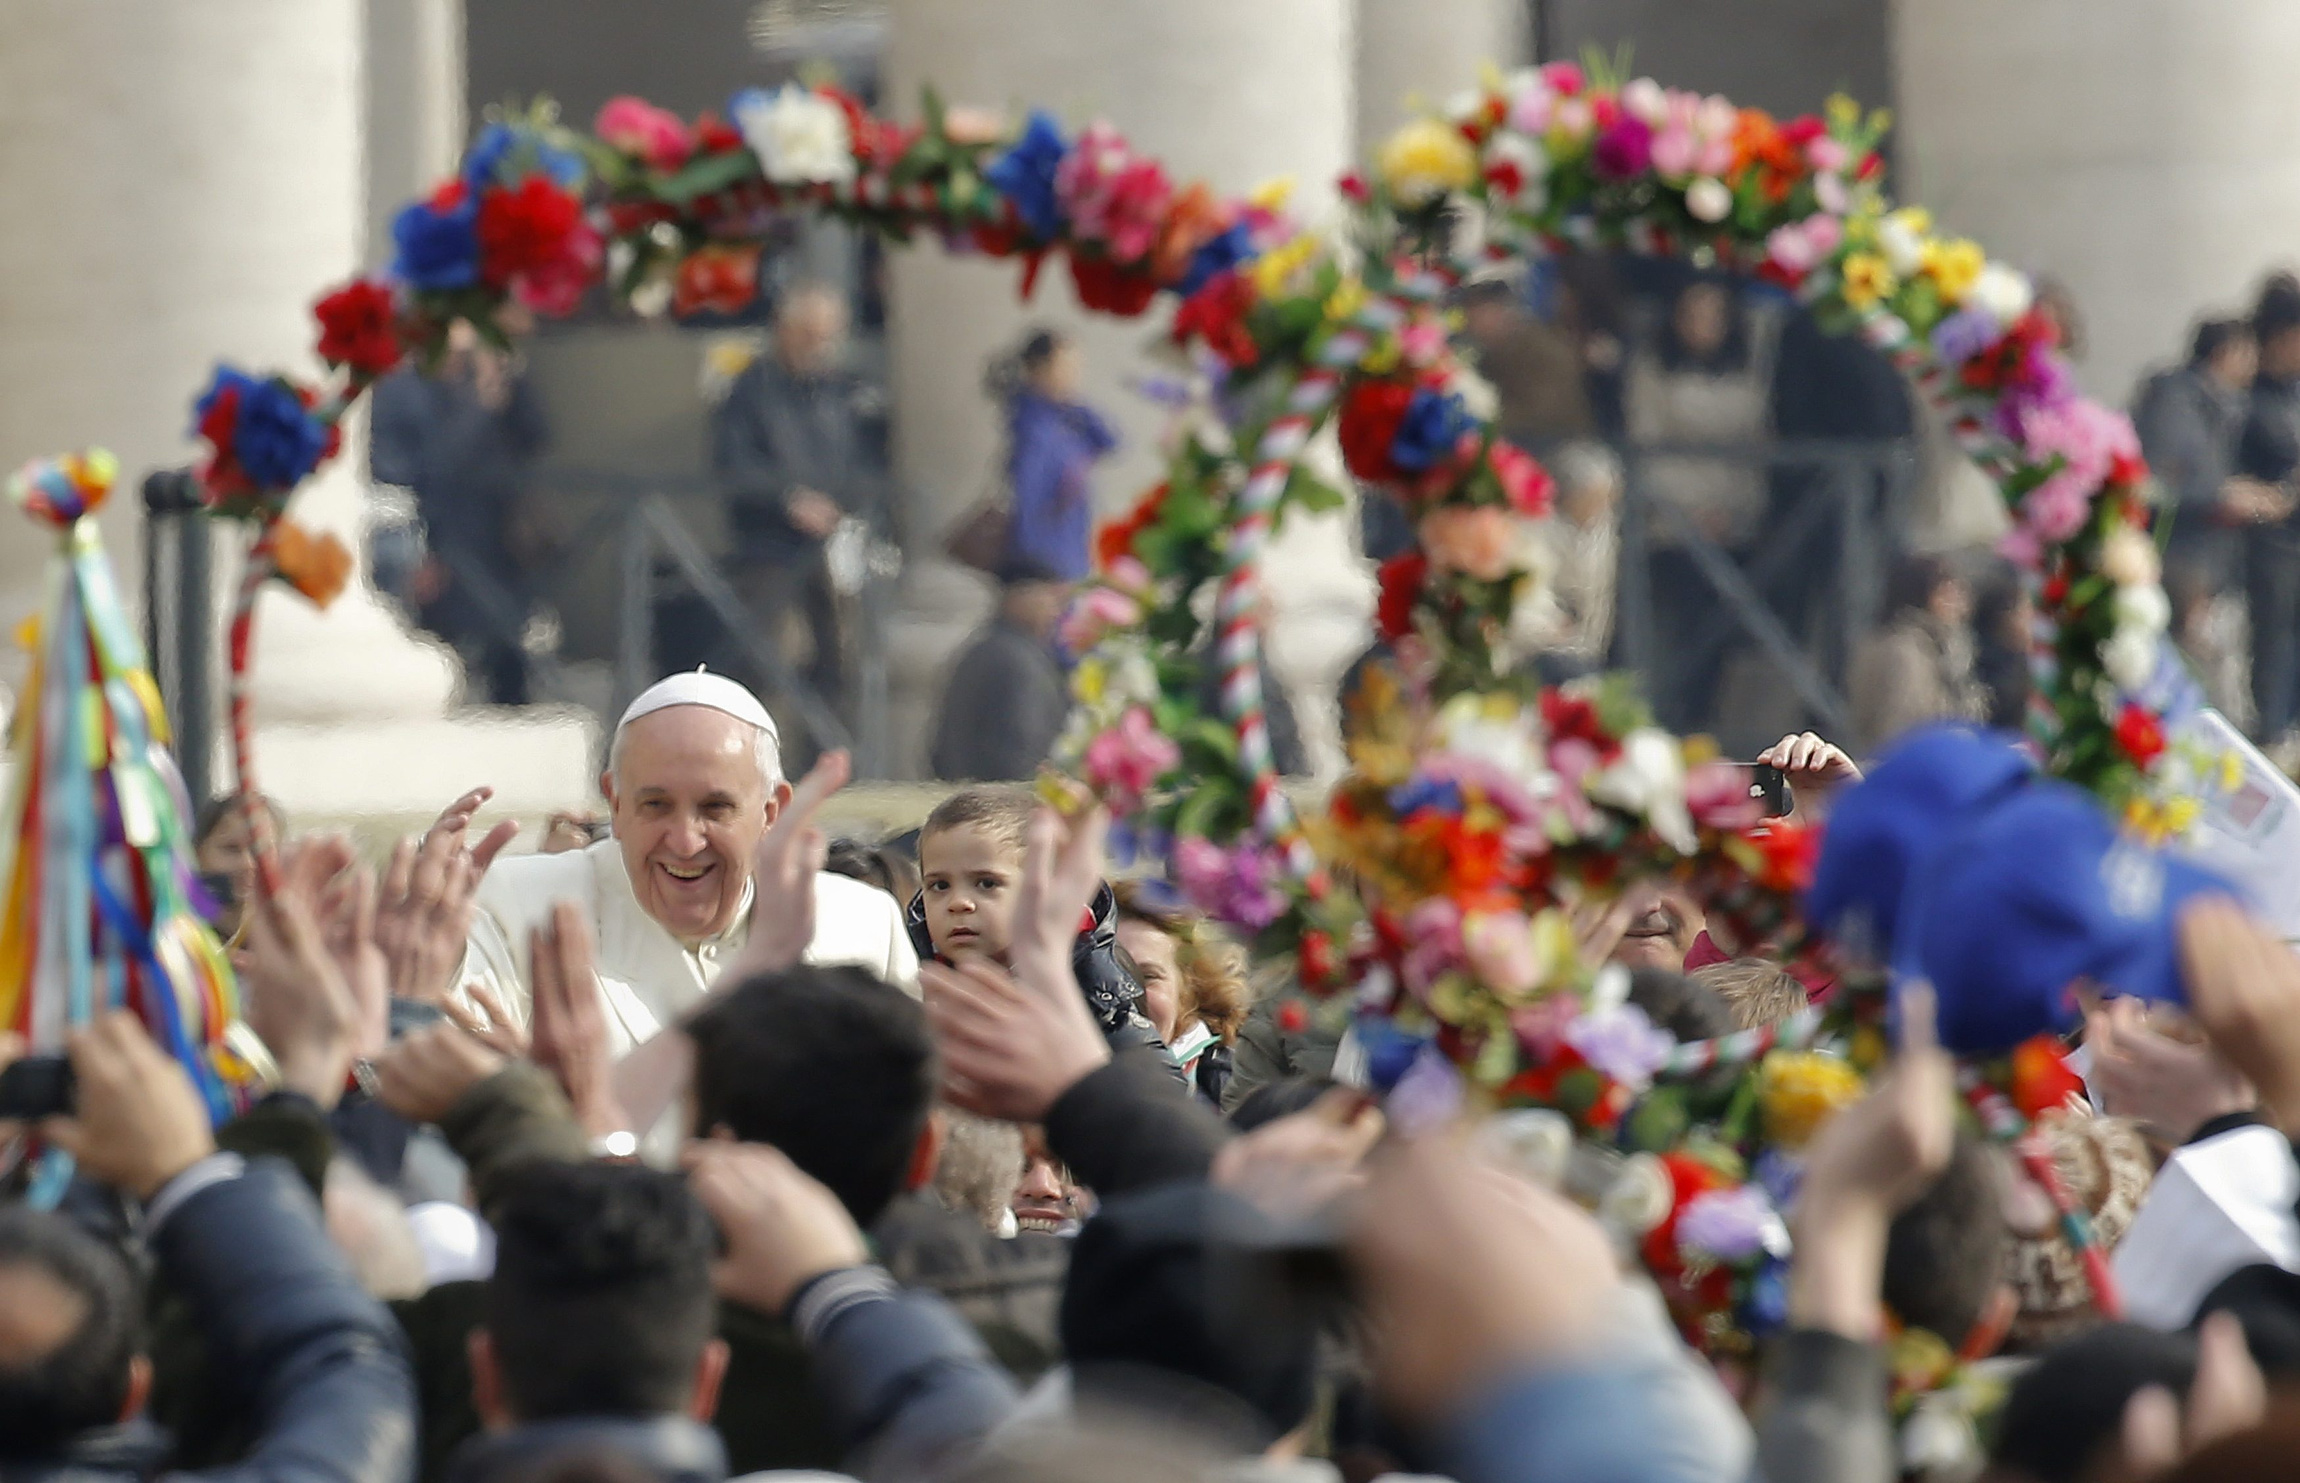 Pope Francis smiles as he arrives to lead his general audience in St. Peter's Square at the Vatican Feb. 26. (CNS photo/Tony Gentile, Reuters) (Feb. 26, 2014)